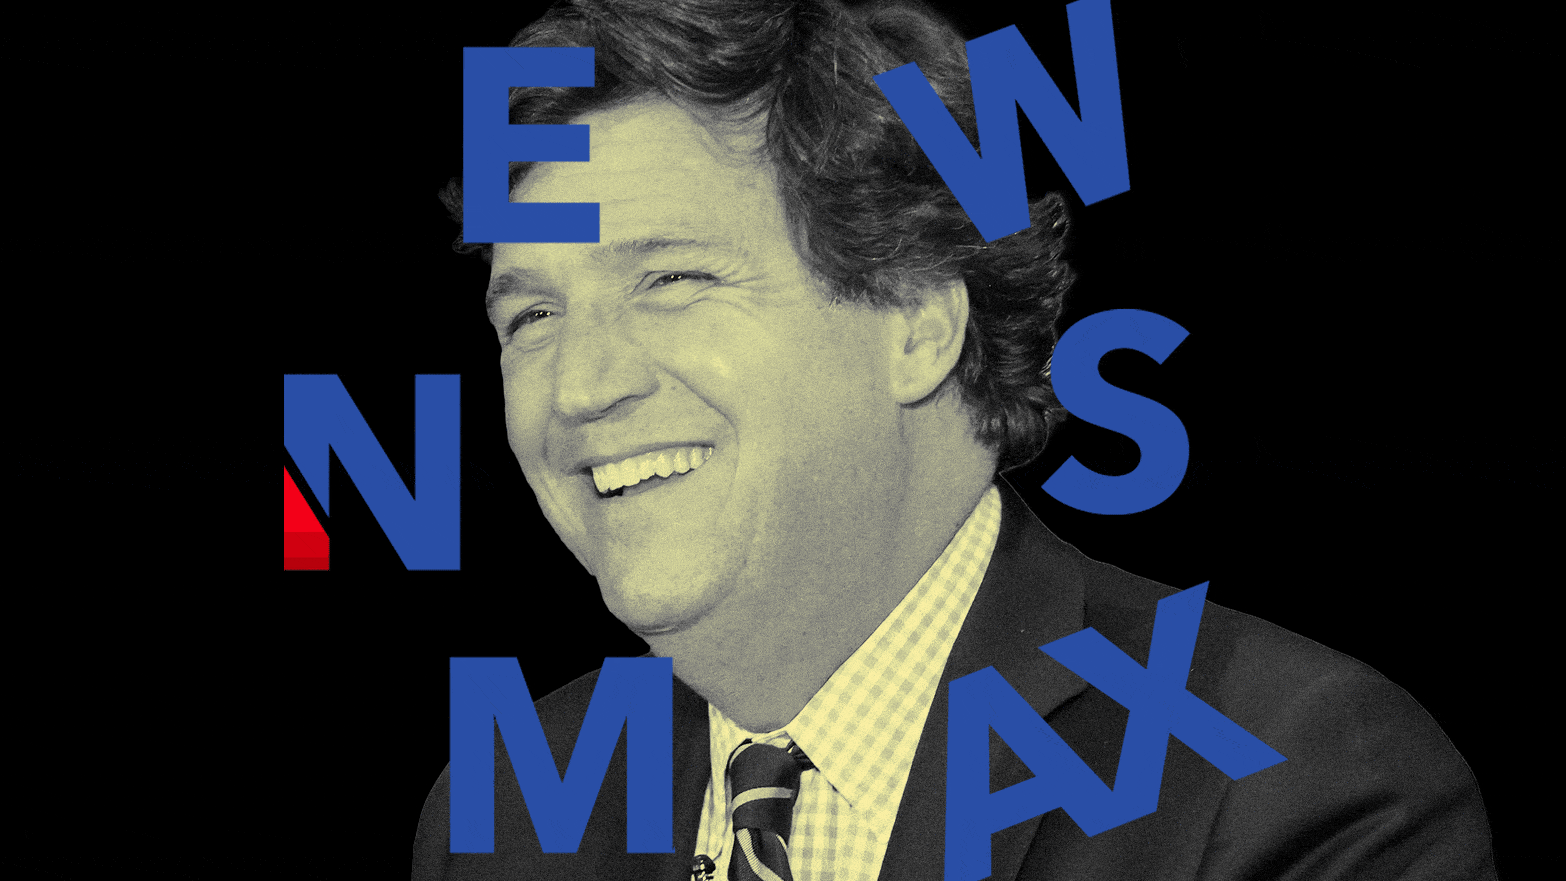 An animation of Tucker Carlson and the Newsmax logo.